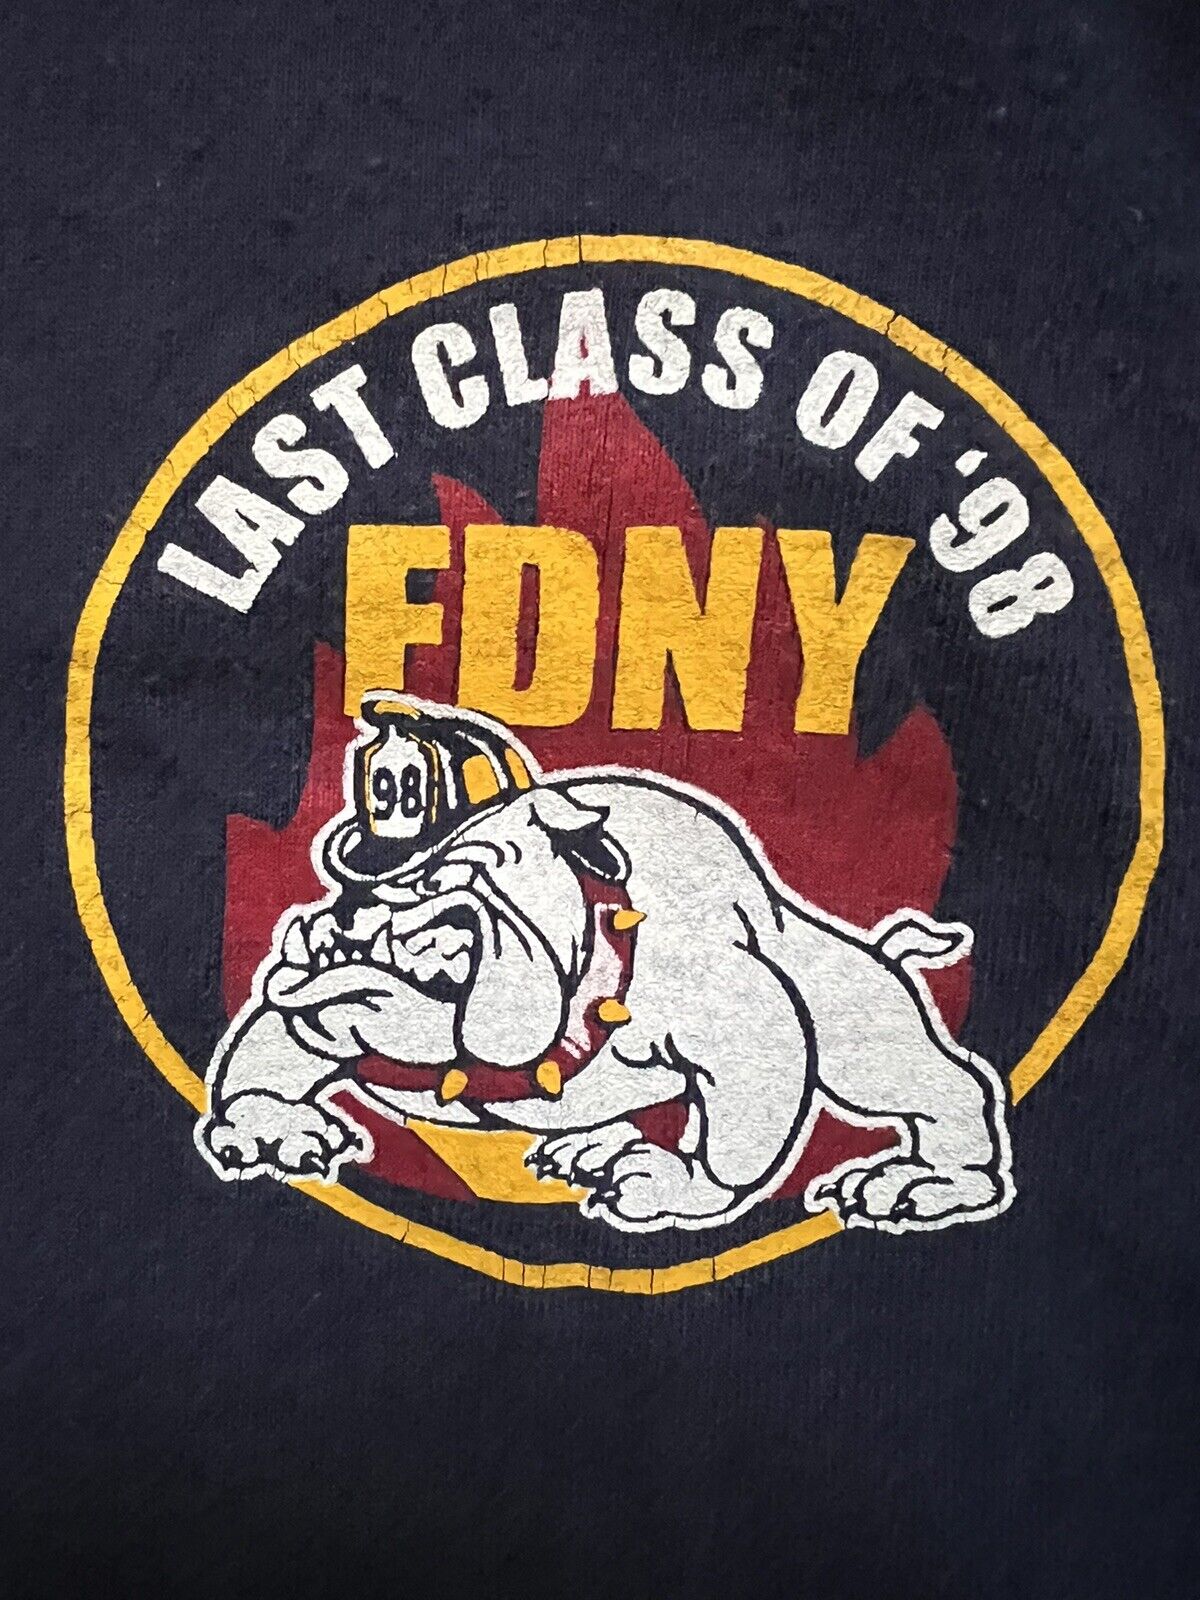 RARE 90s Vintage Last Class The Rock Probie NYC Firefighter Firehouse Shirt L